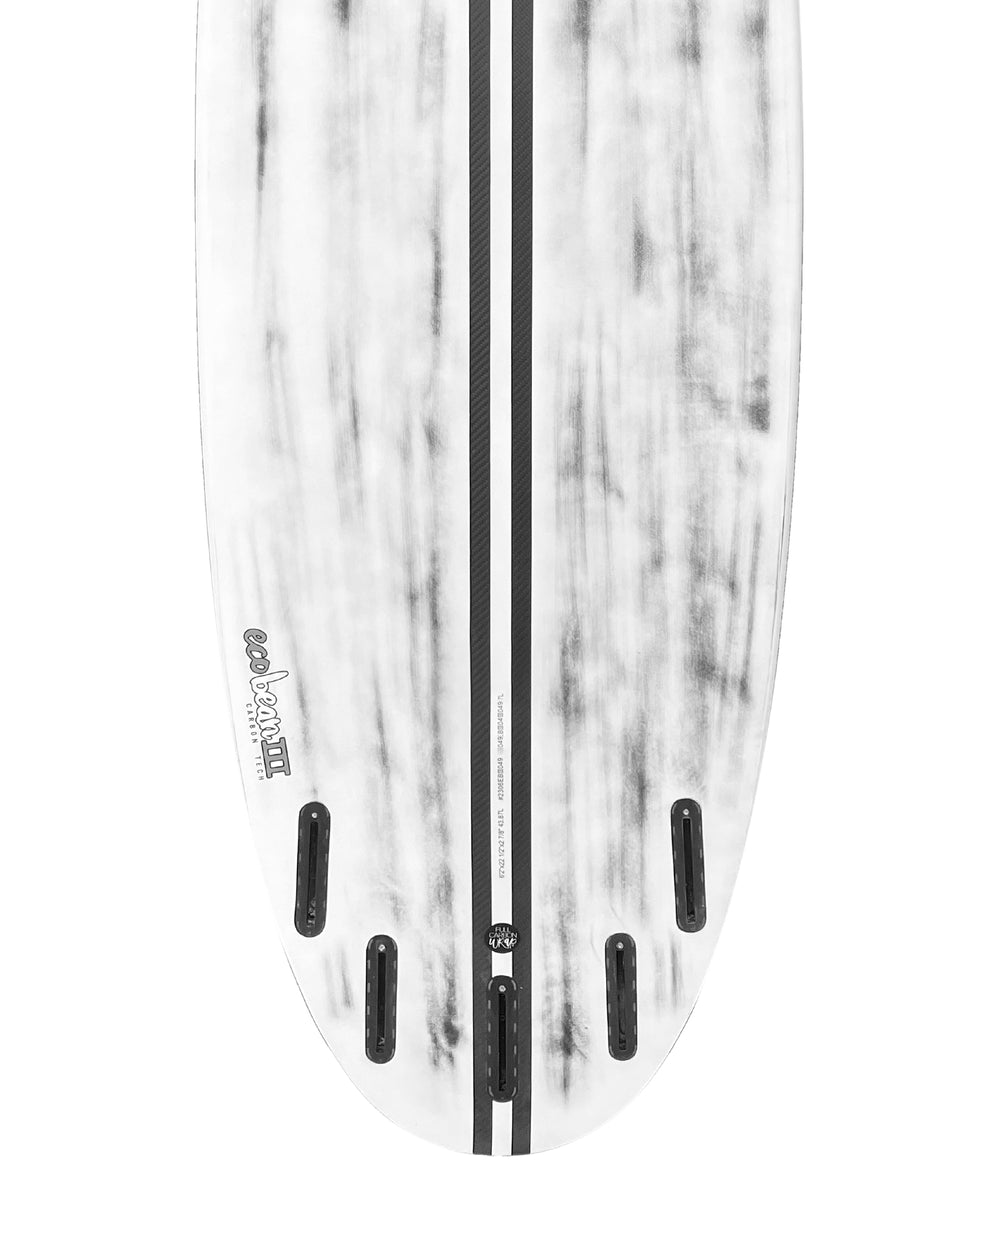 Eco Bean Funboard III - Carbon Wrap